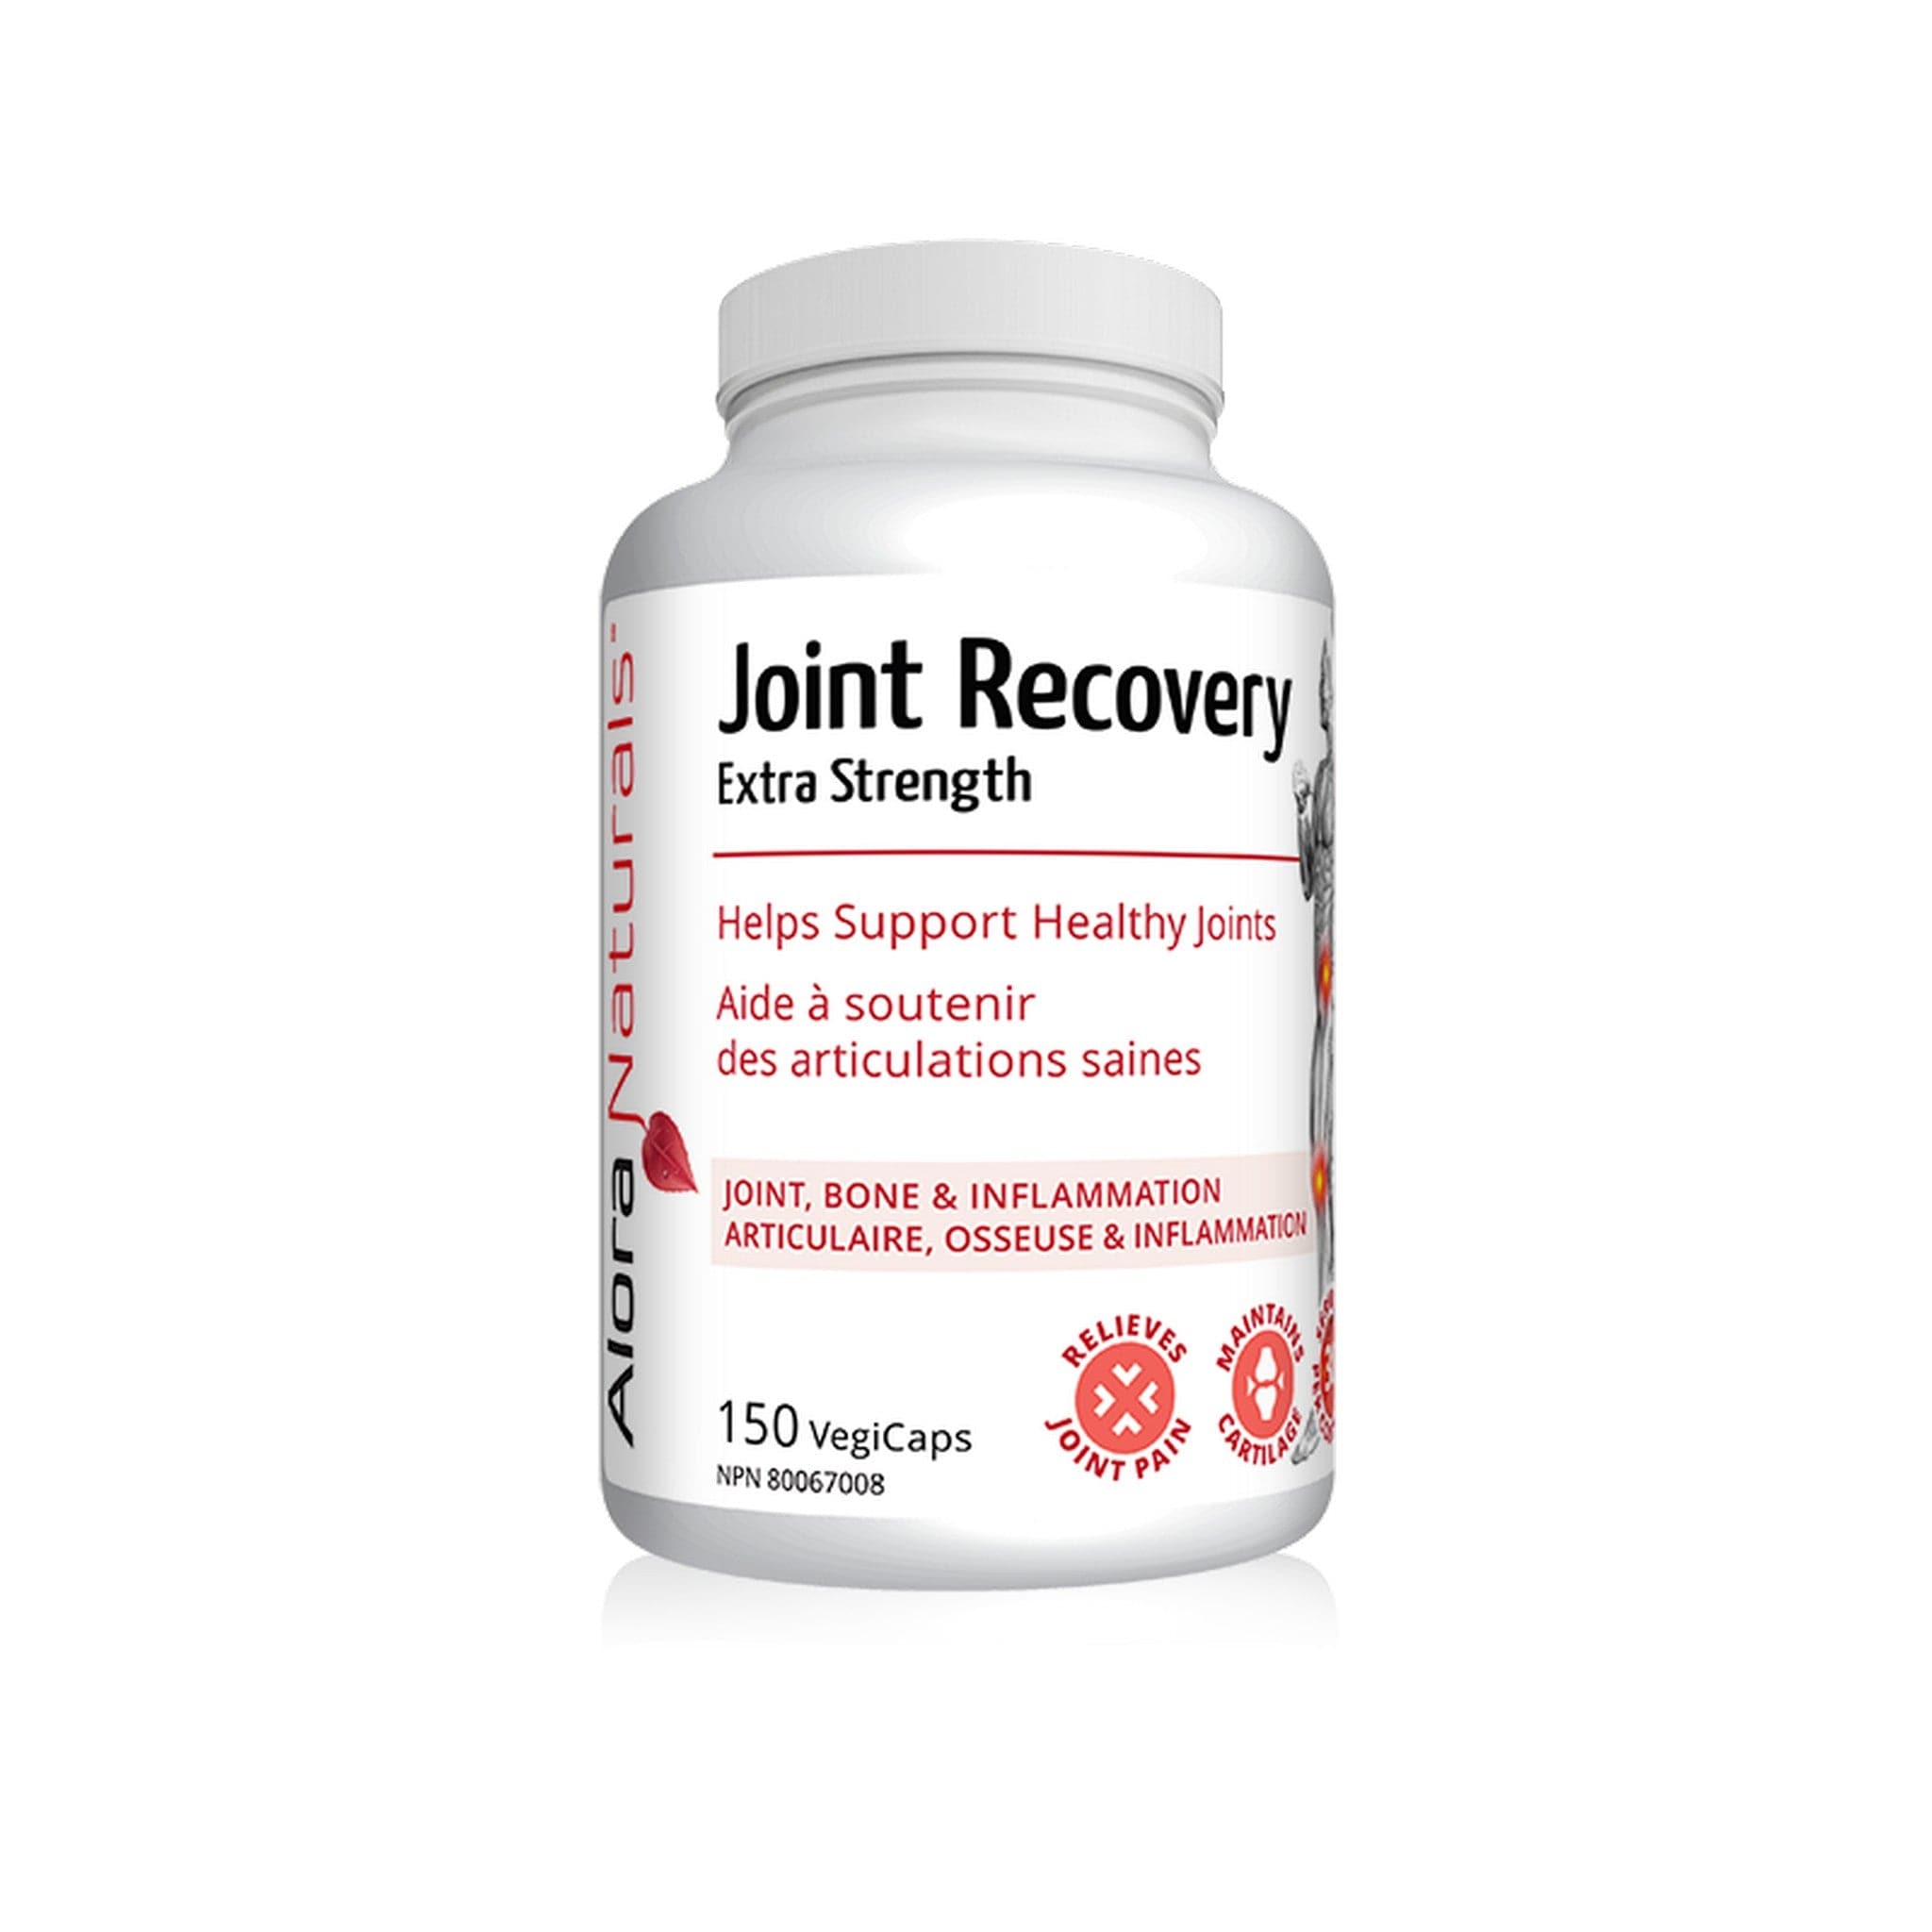 Alora Naturals Joint Recovery 150 capsules